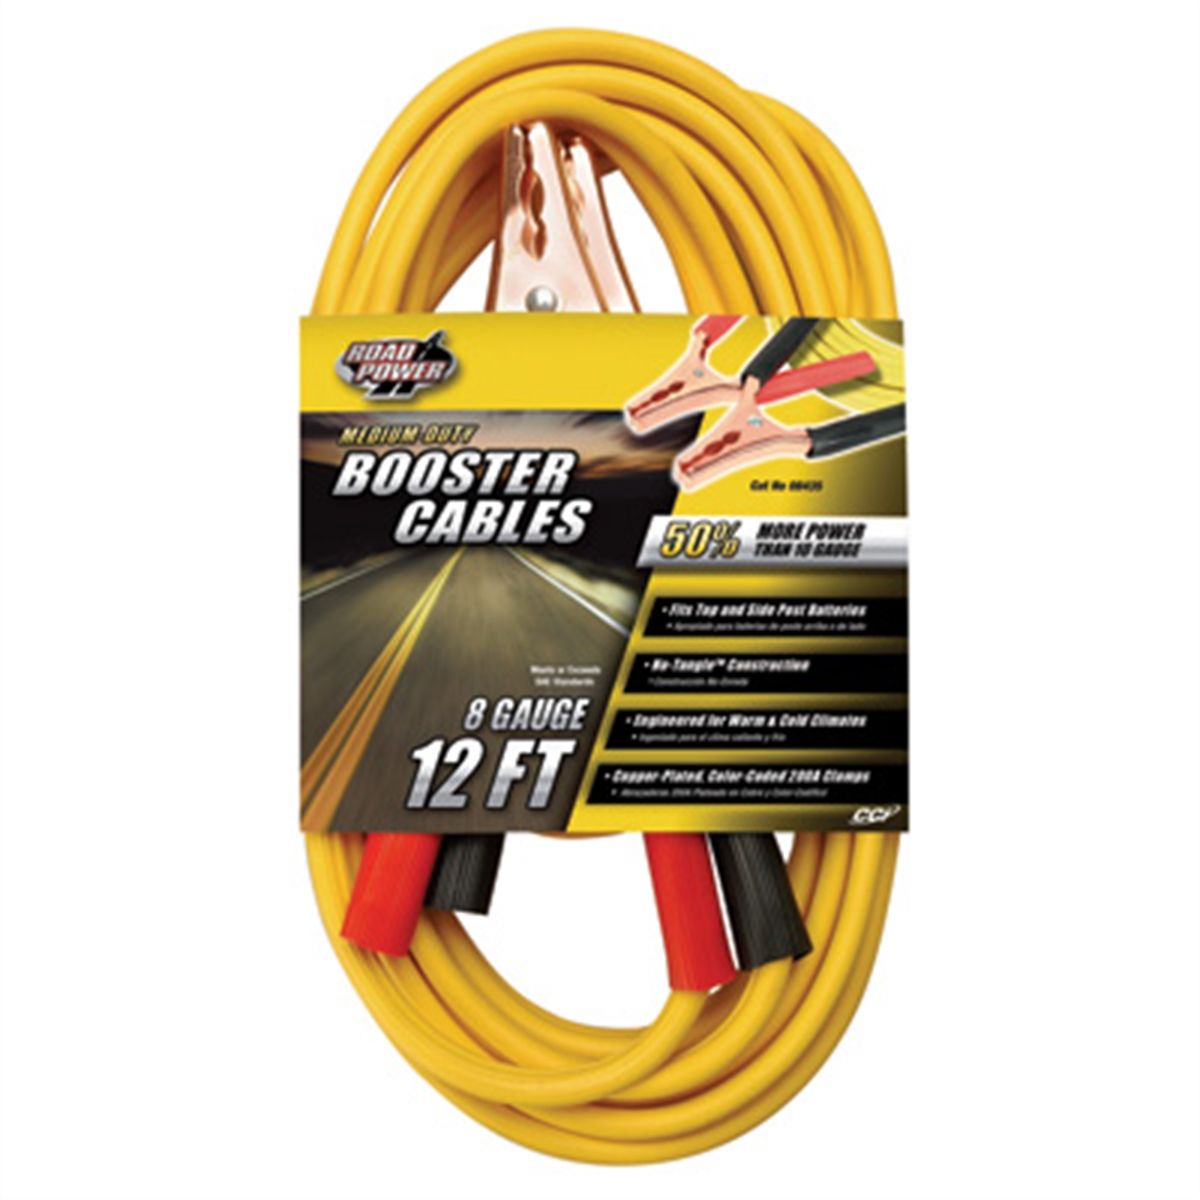 Booster Cable 12' 200 Amp 8GA